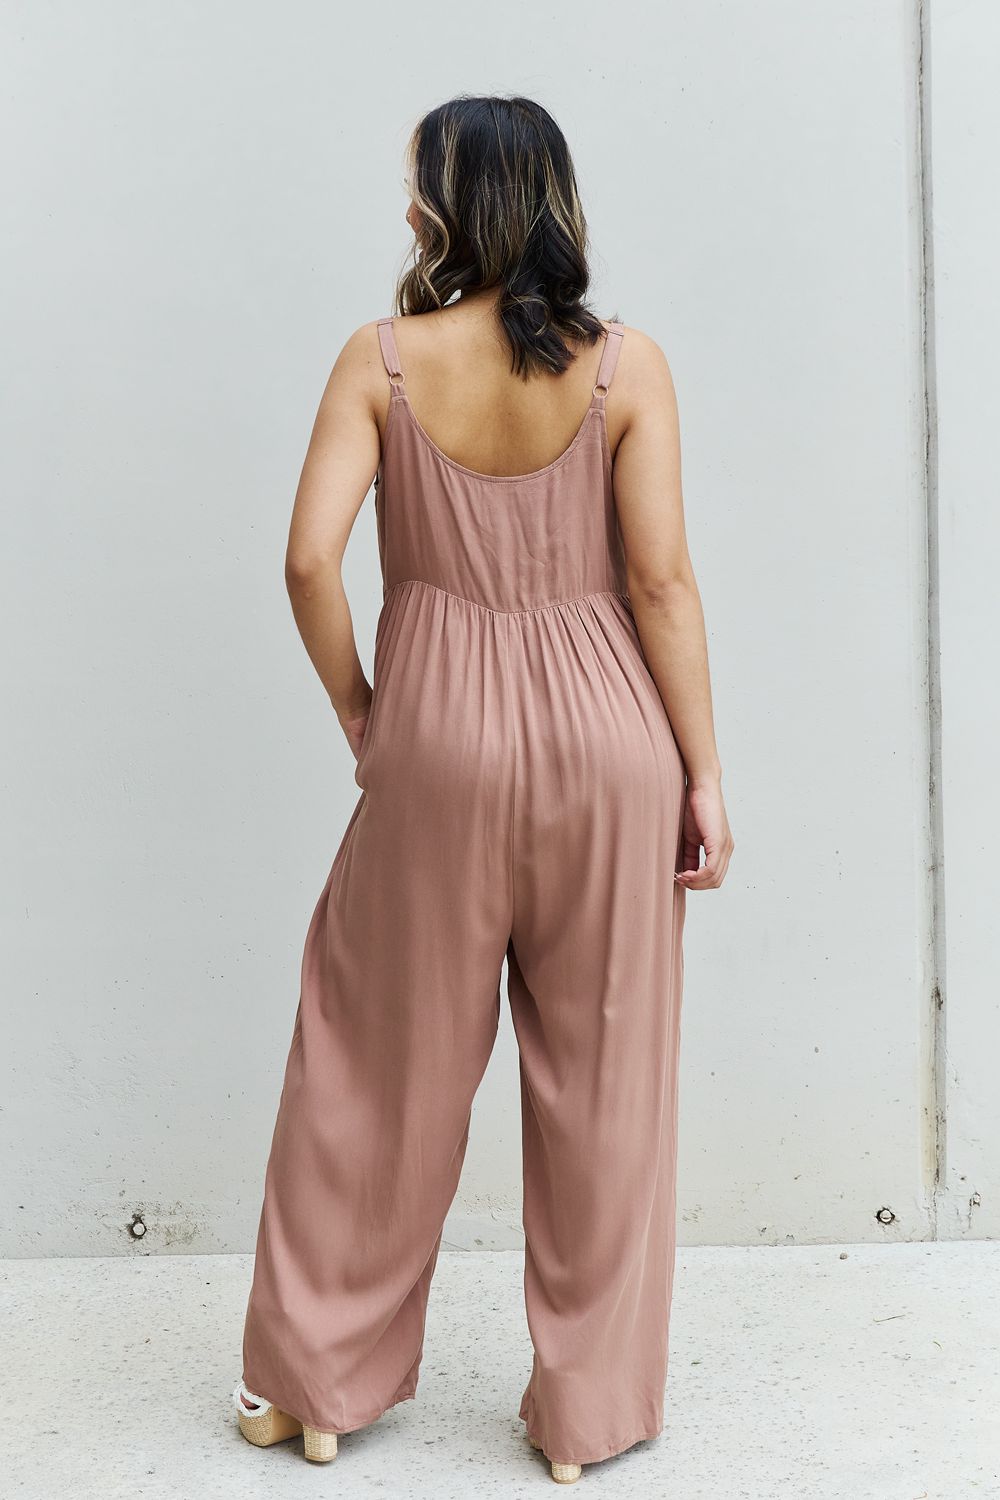 HEYSON All Day Full Size Wide Leg Button Down Jumpsuit in Mocha free shipping -Oh Em Gee Boutique